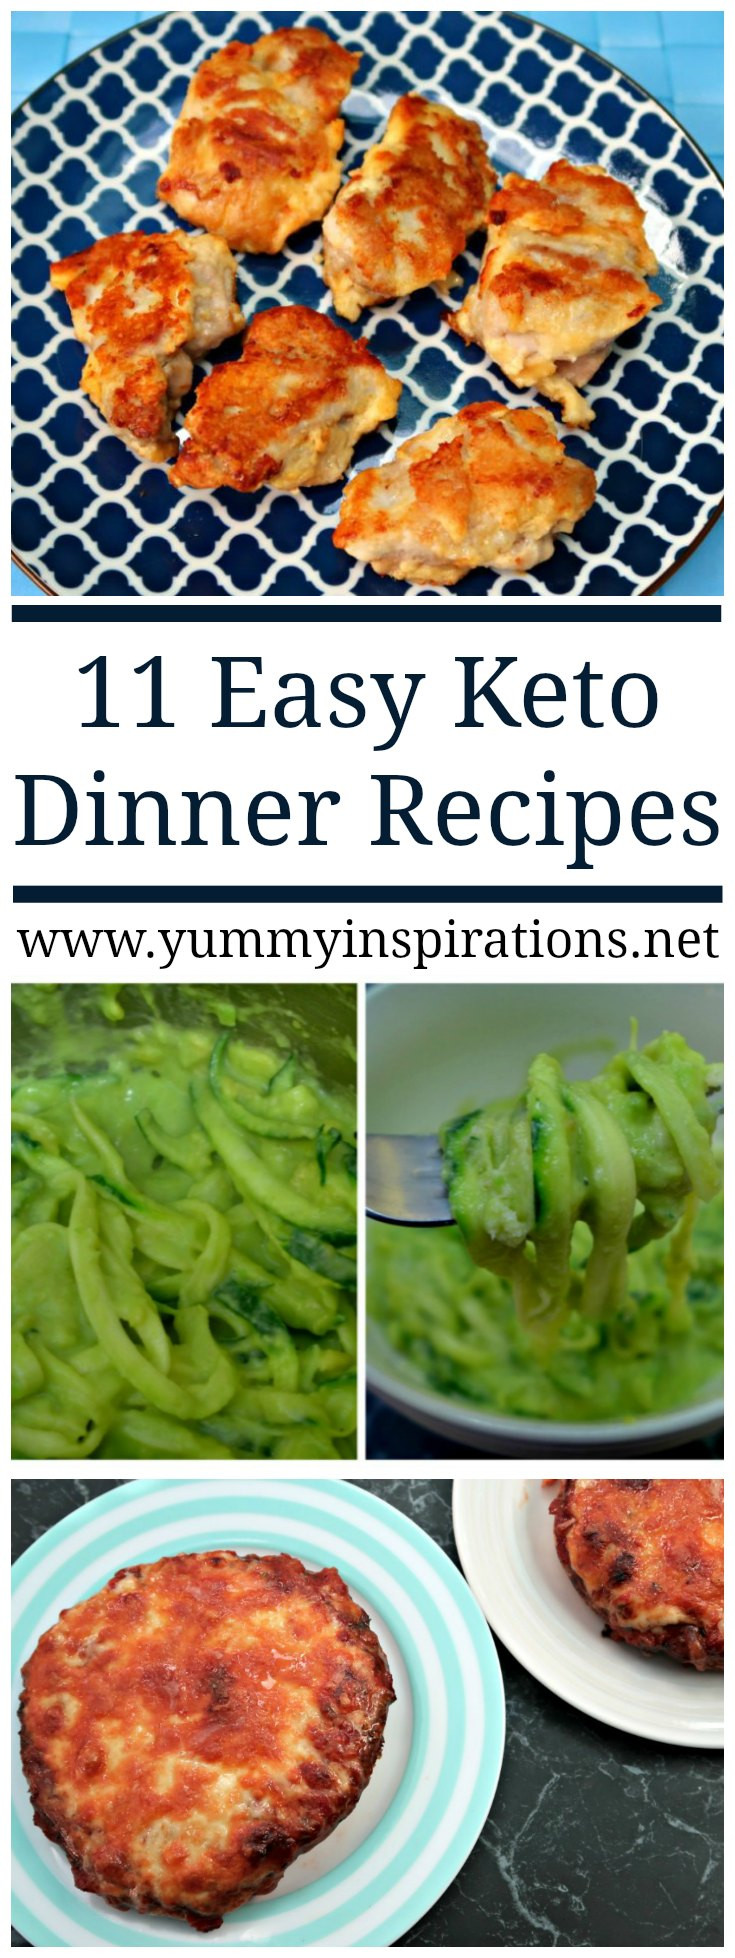 Keto Dinners Easy
 11 Easy Keto Dinner Recipes Quick Low Carb Ketogenic